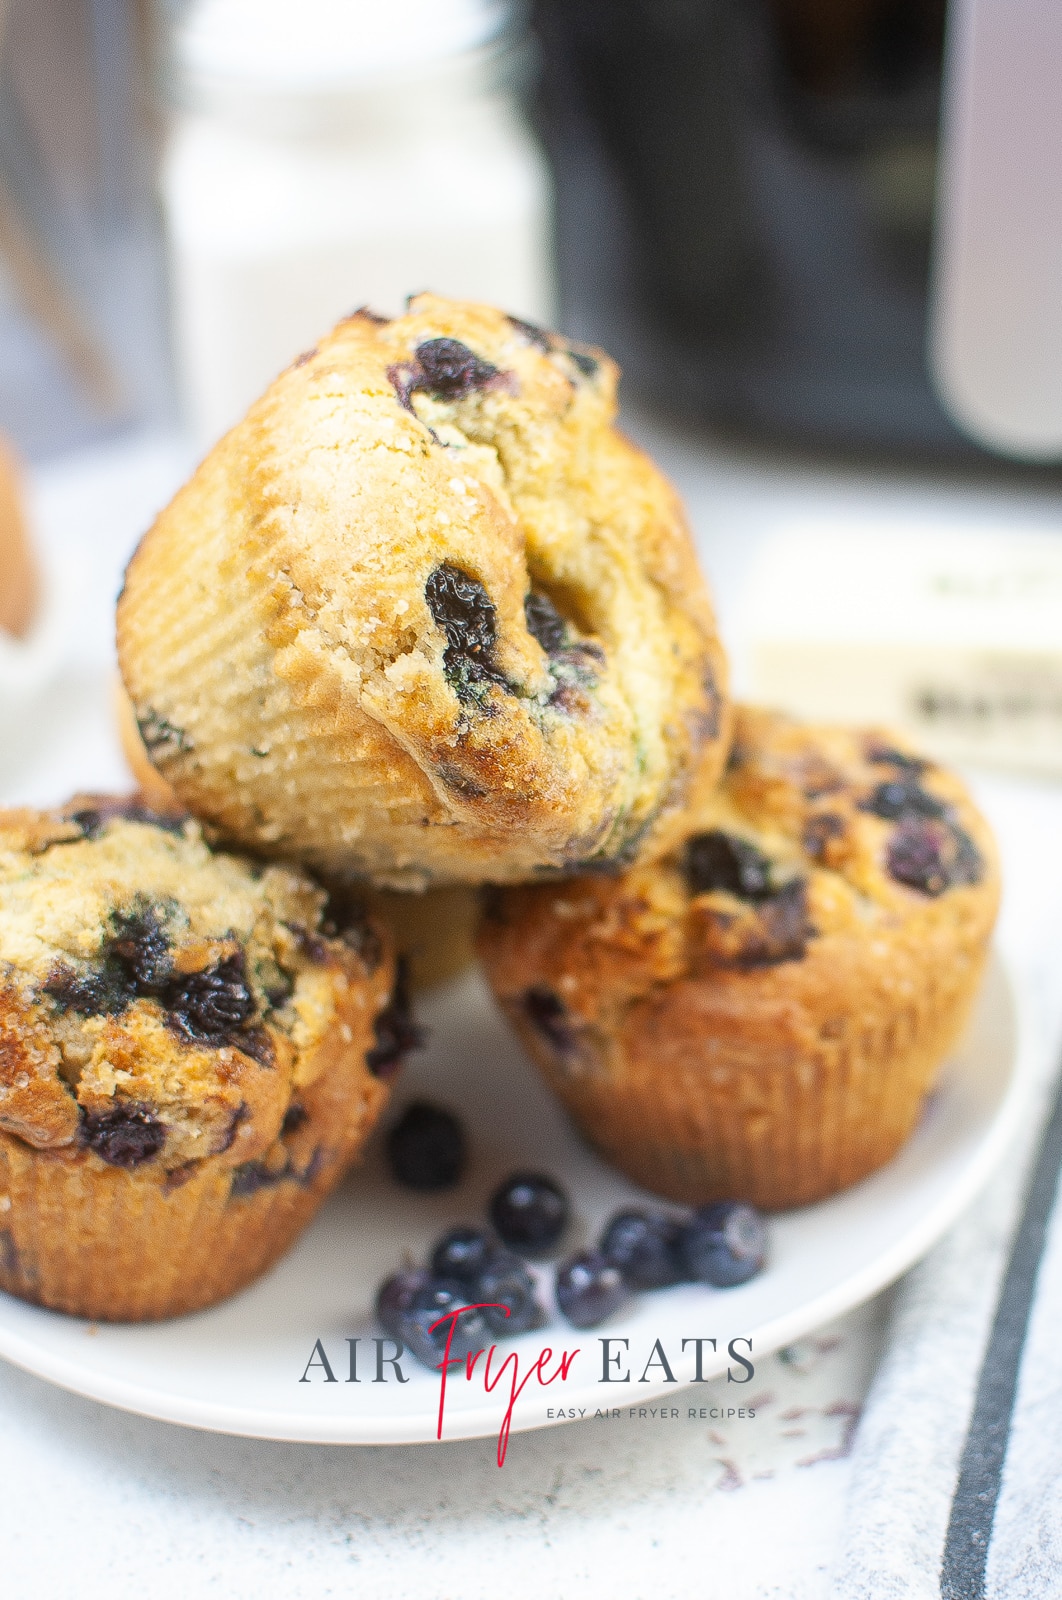 vertical photo showing a plate with four air fryer blueberry muffins and a few loose blueberries. On a white surface